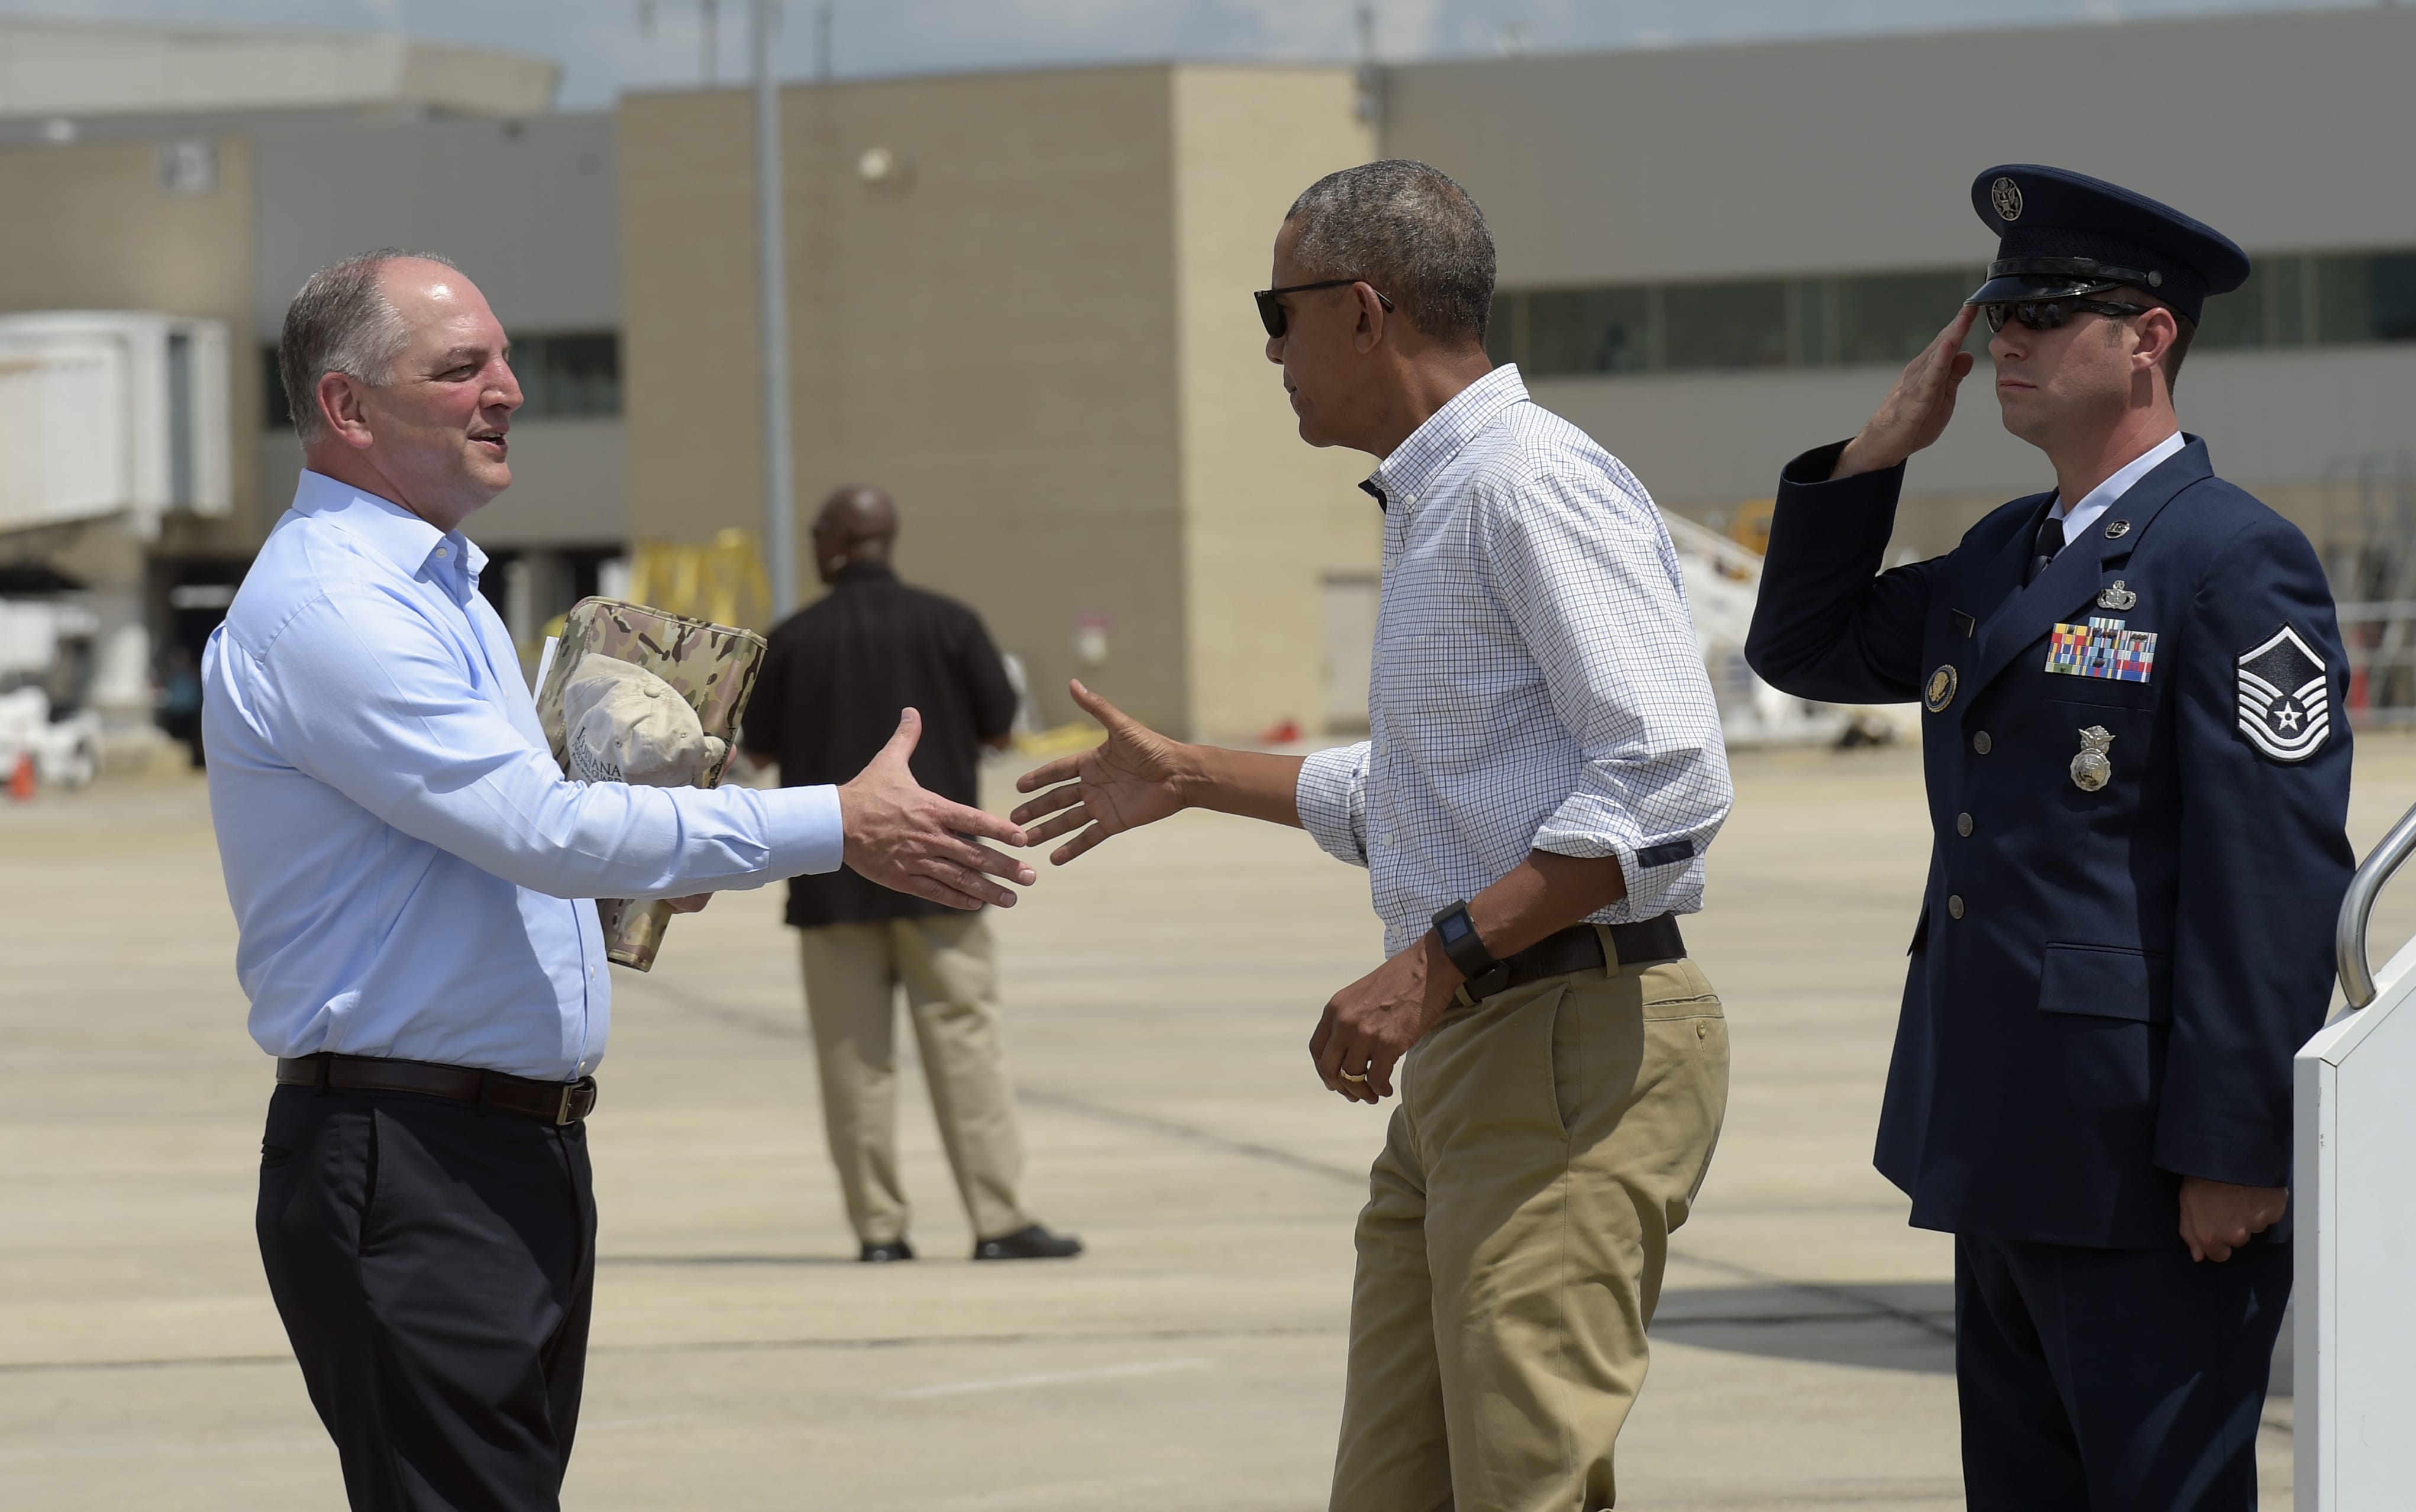 President Barack Obama reaches to shake hands with Louisiana Gov. John Bel Edwards, after arriving on Air Force One at Baton Rouge Metropolitan Airport in Baton Rouge, La., Tuesday, Aug. 23, 2016. Obama is traveling to the area to survey the flood damage.